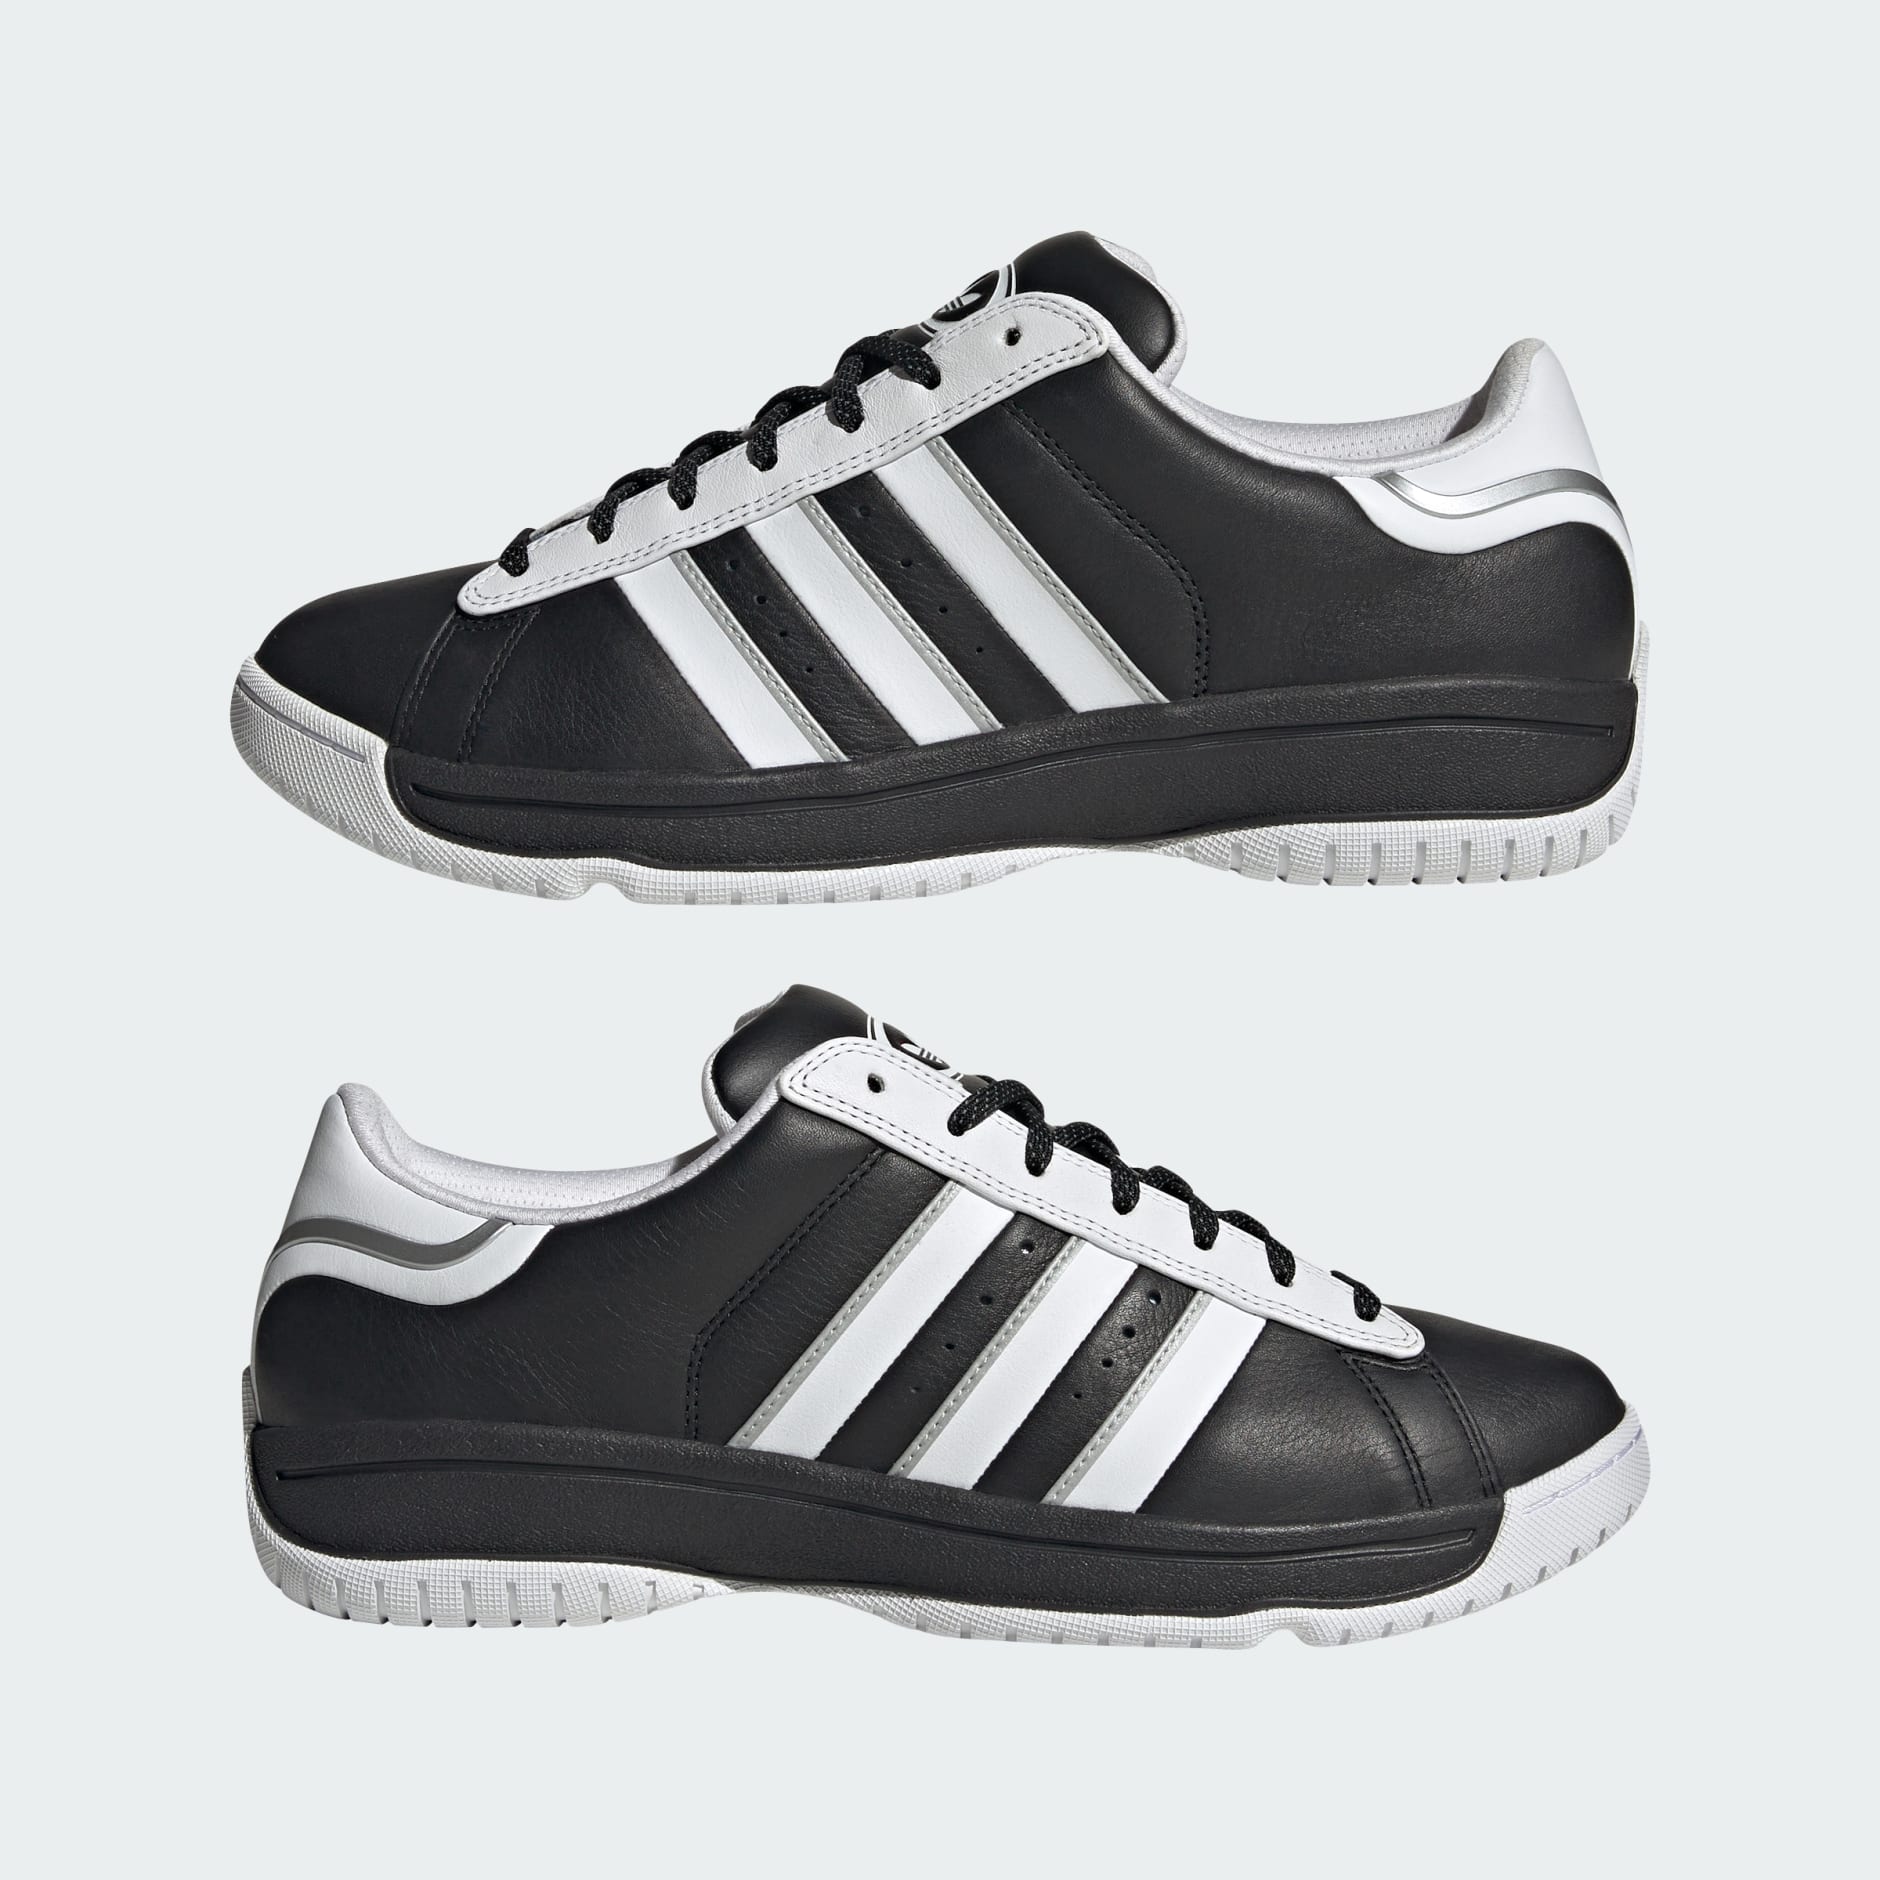 Shoes - Campus Shoes - Black | adidas South Africa